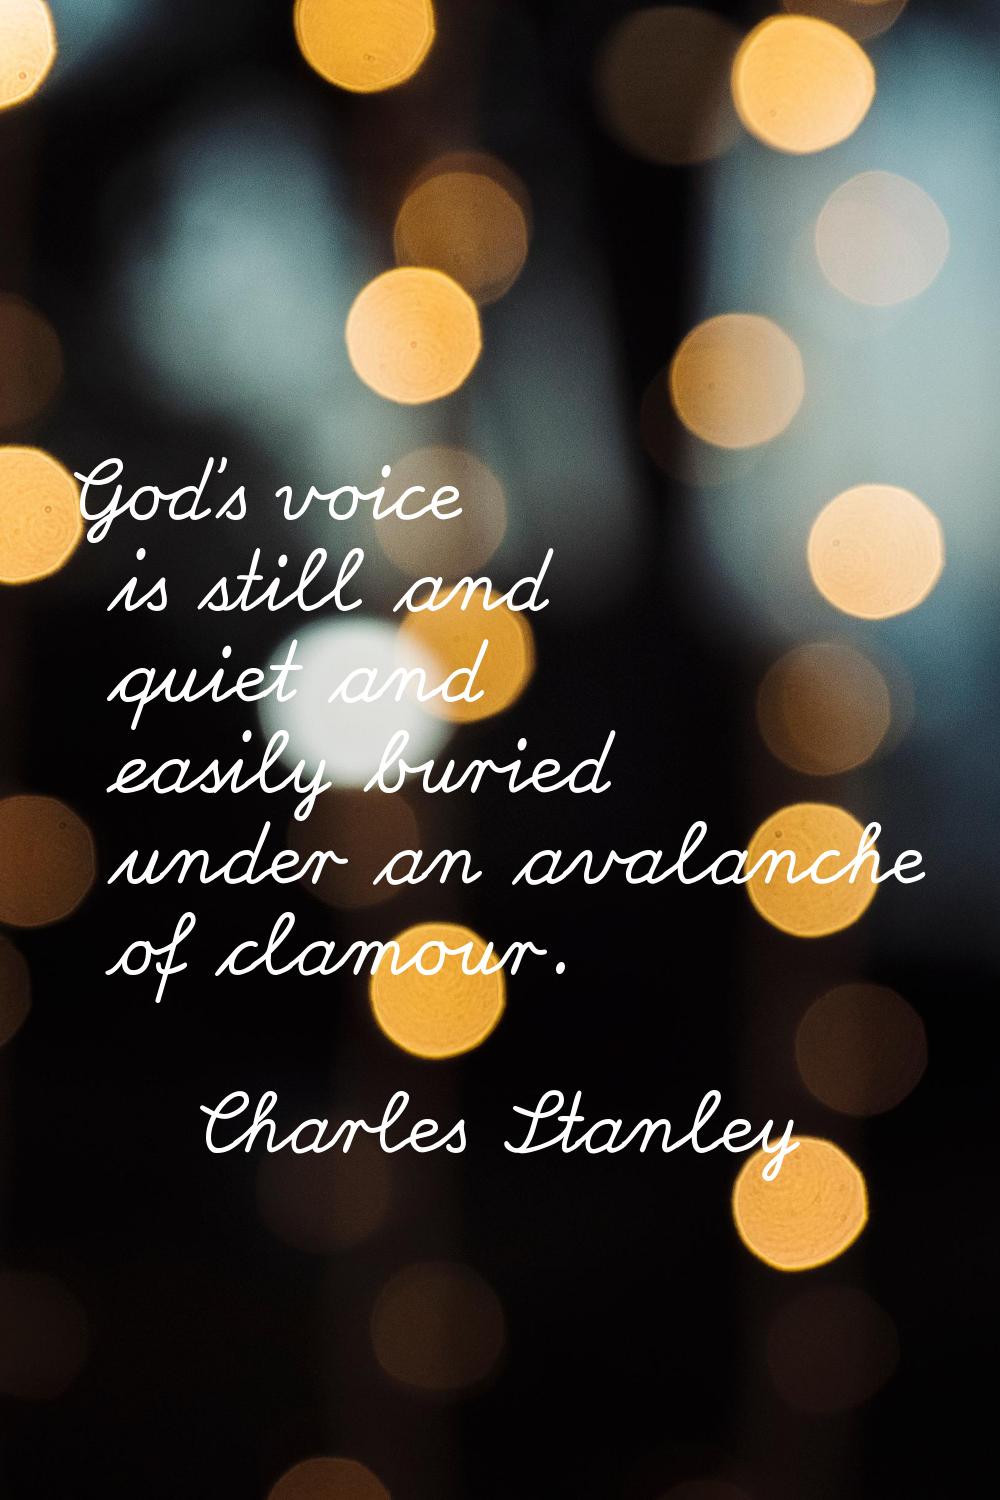 God's voice is still and quiet and easily buried under an avalanche of clamour.